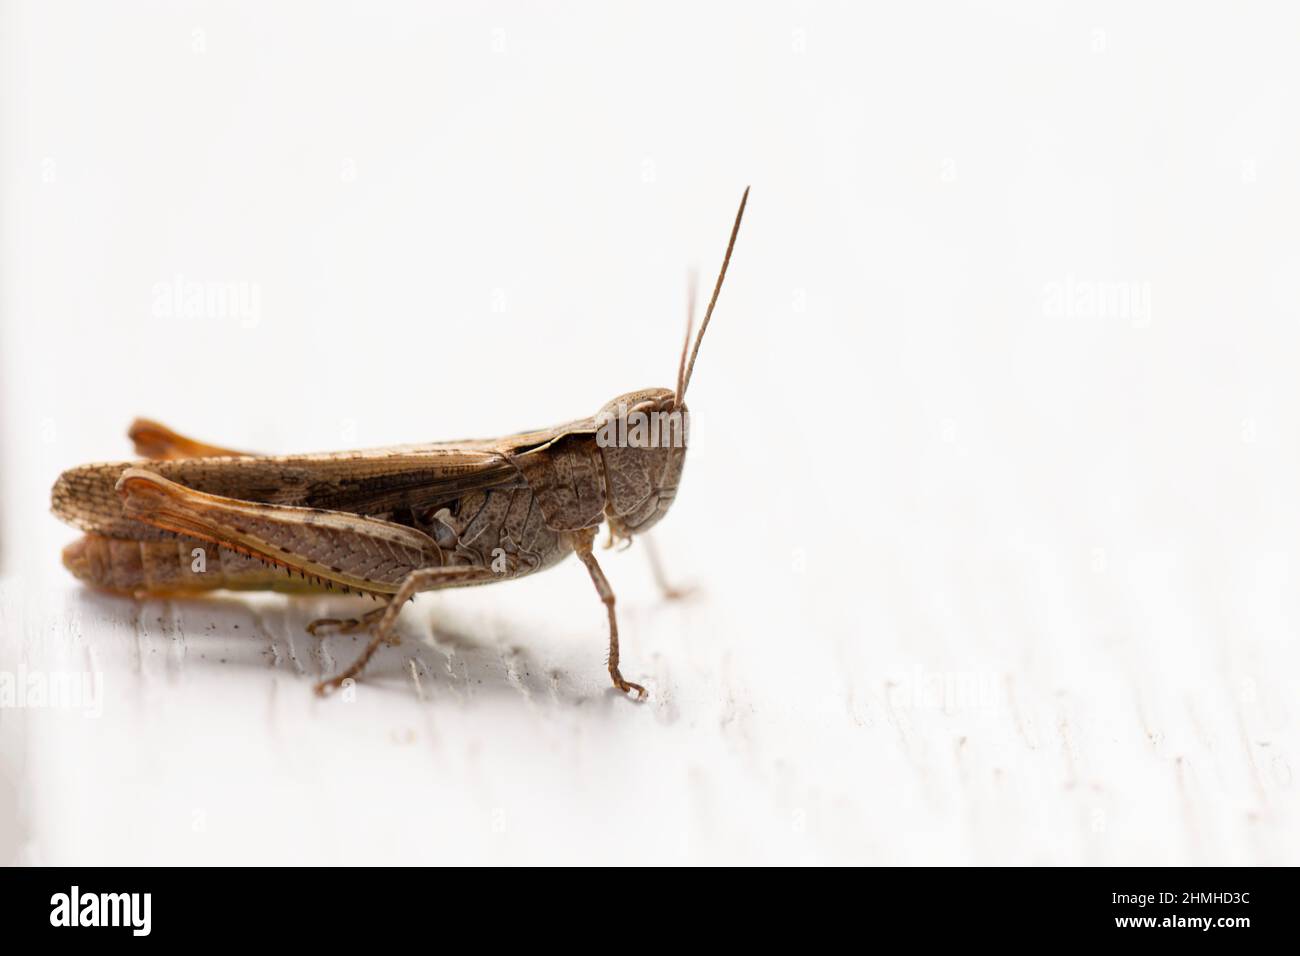 Close-up of Grasshopper on white table, outdoor scene Stock Photo